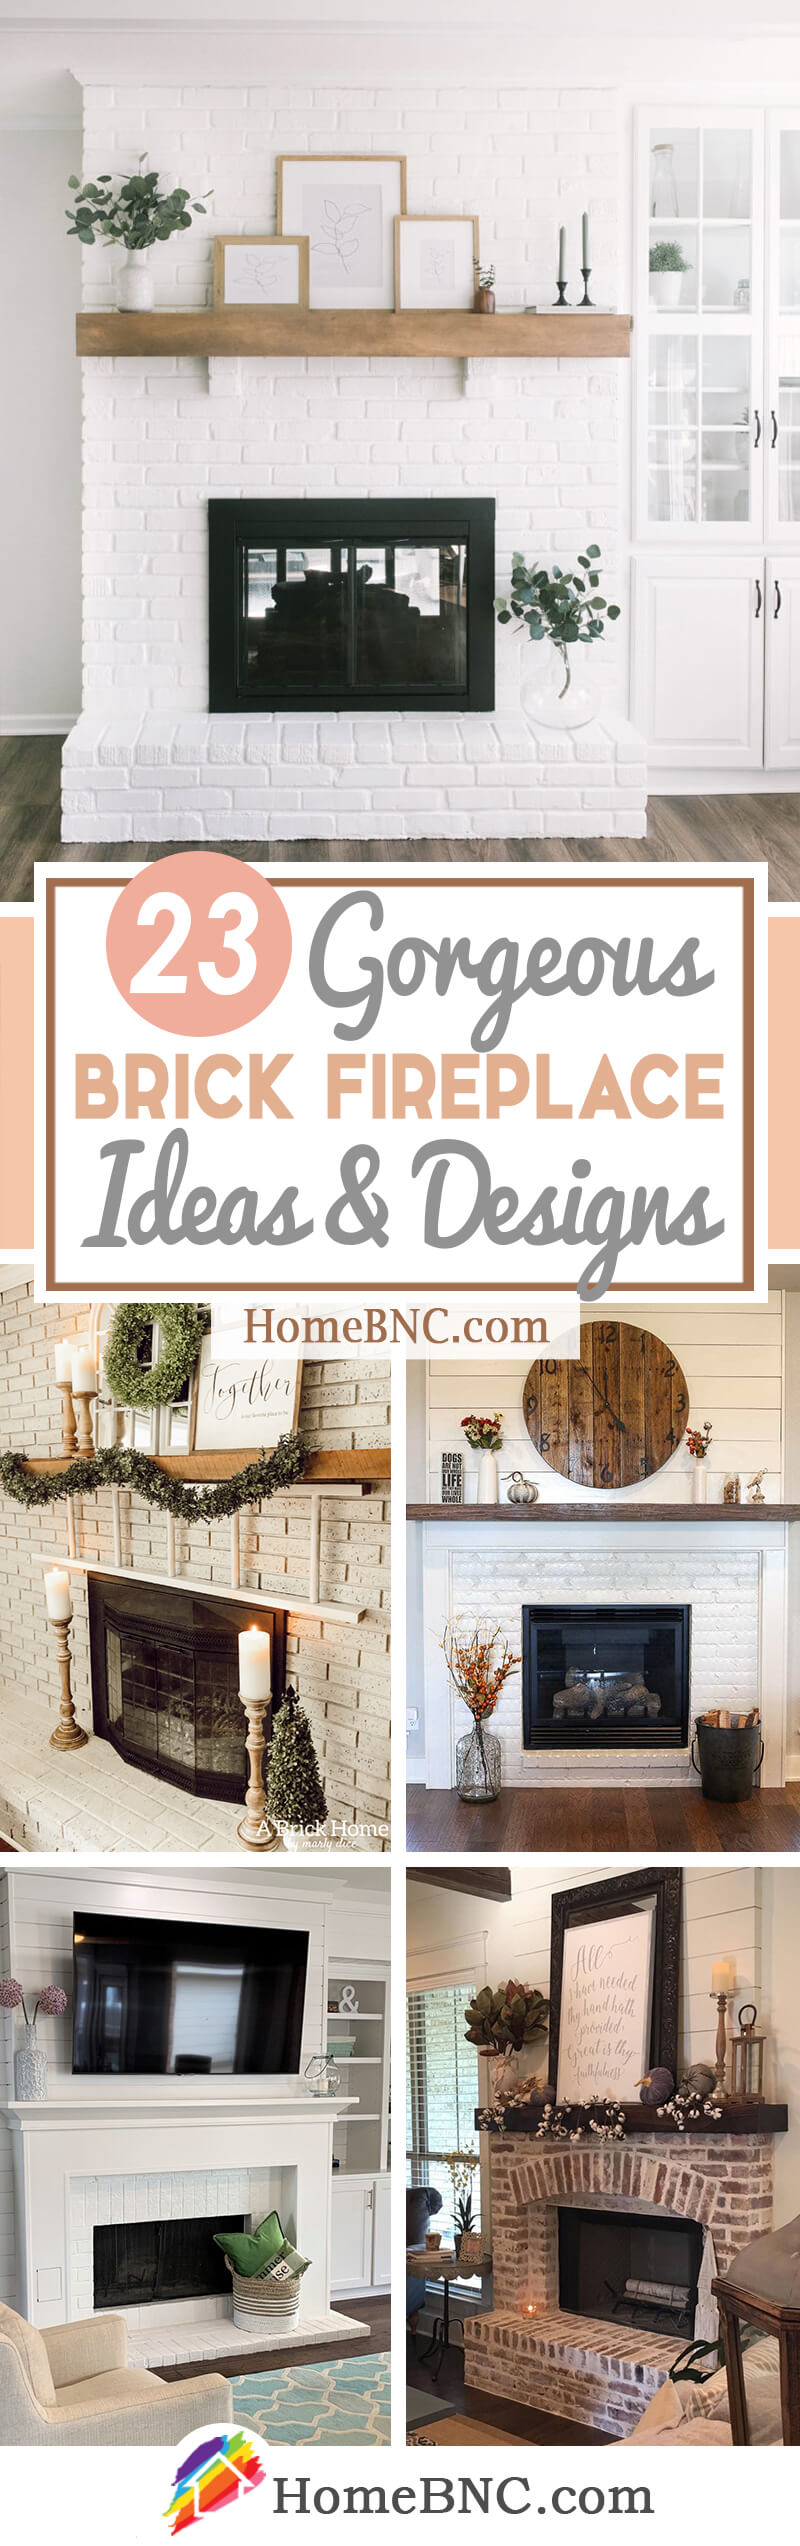 23 Best Brick Fireplace Ideas To Make, Are Red Brick Fireplaces Out Of Style 2021